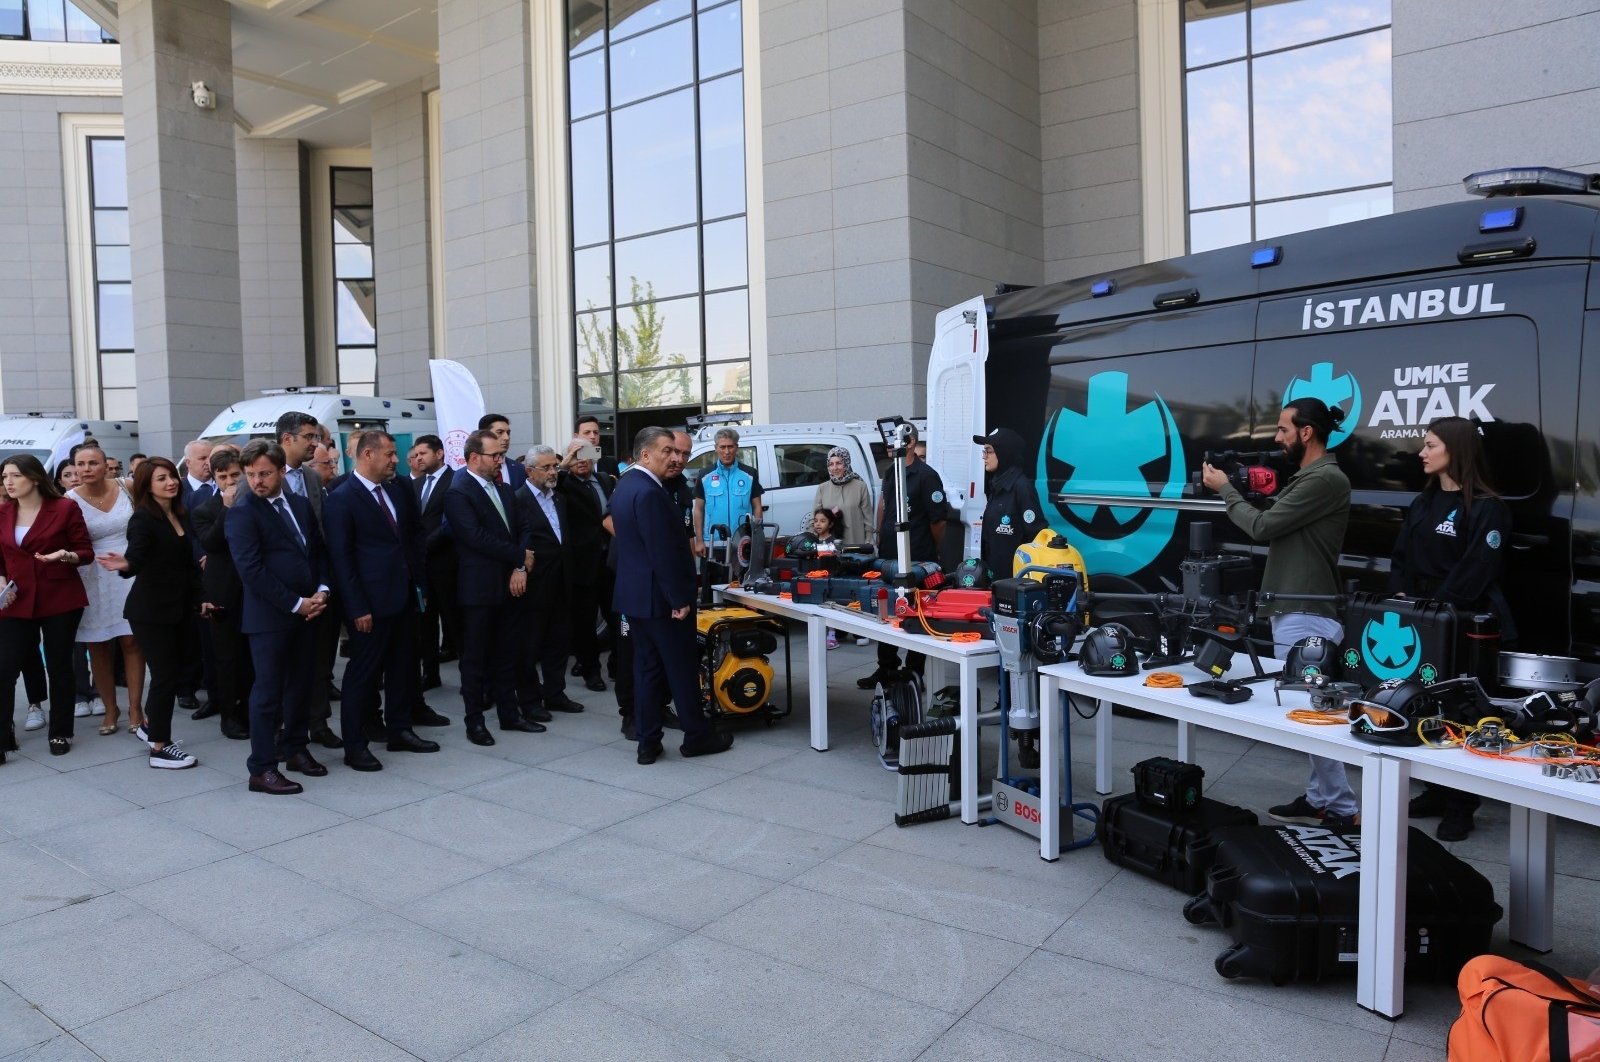 Türkiye institutes new medical unit for search and rescue ops